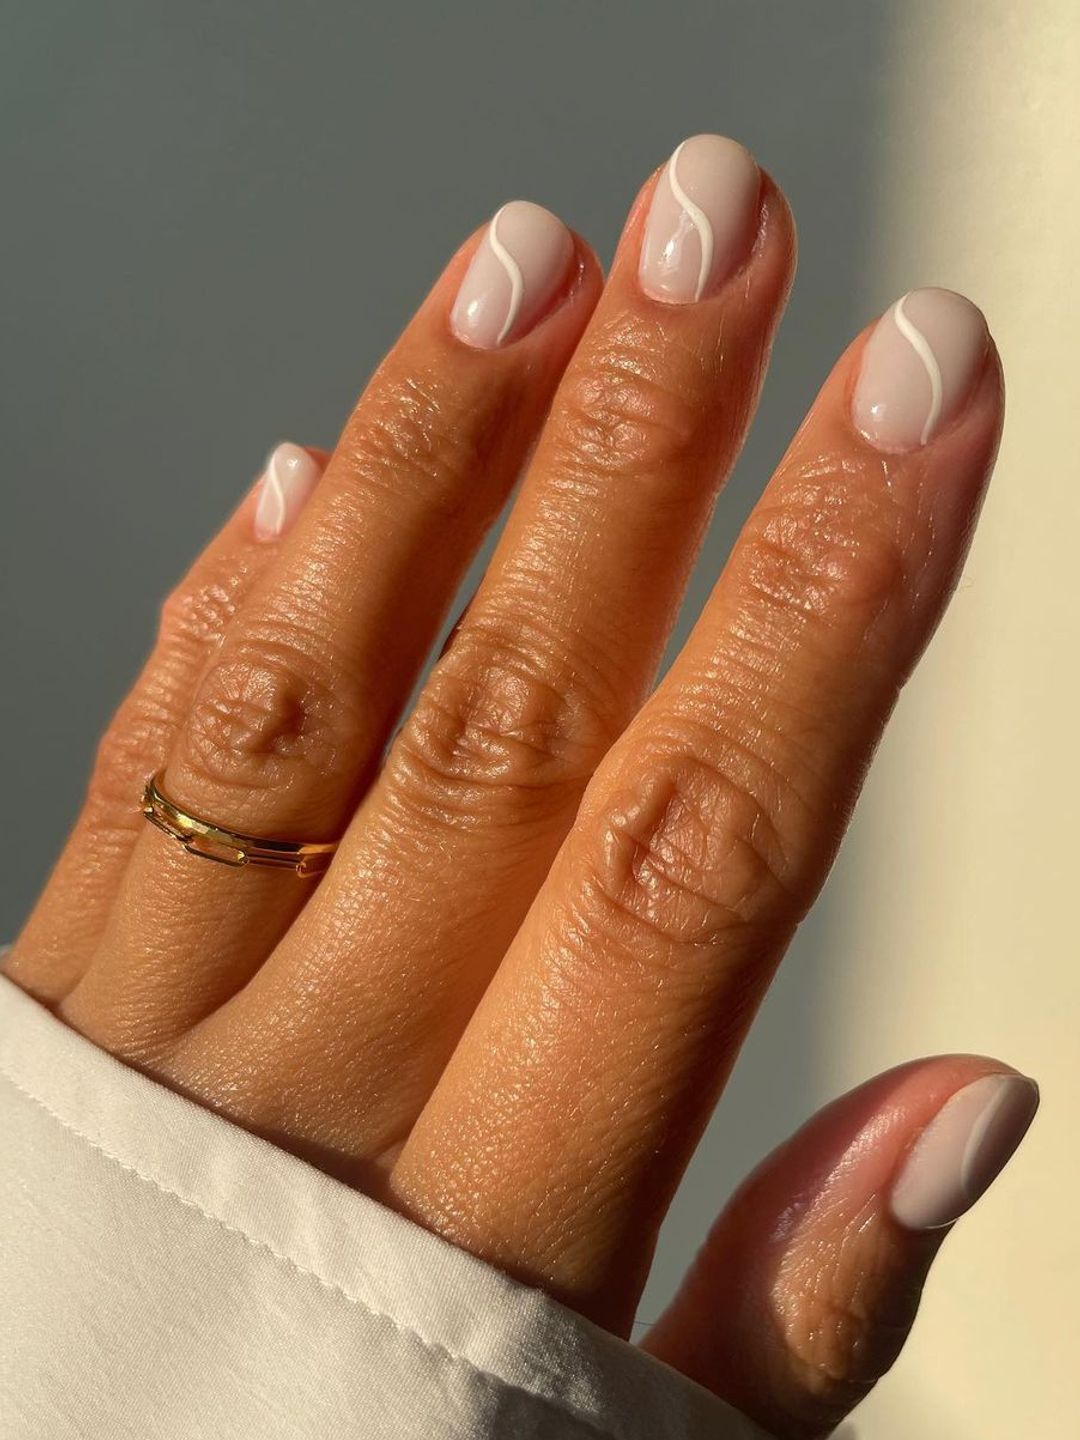 Neutral nails with line across them